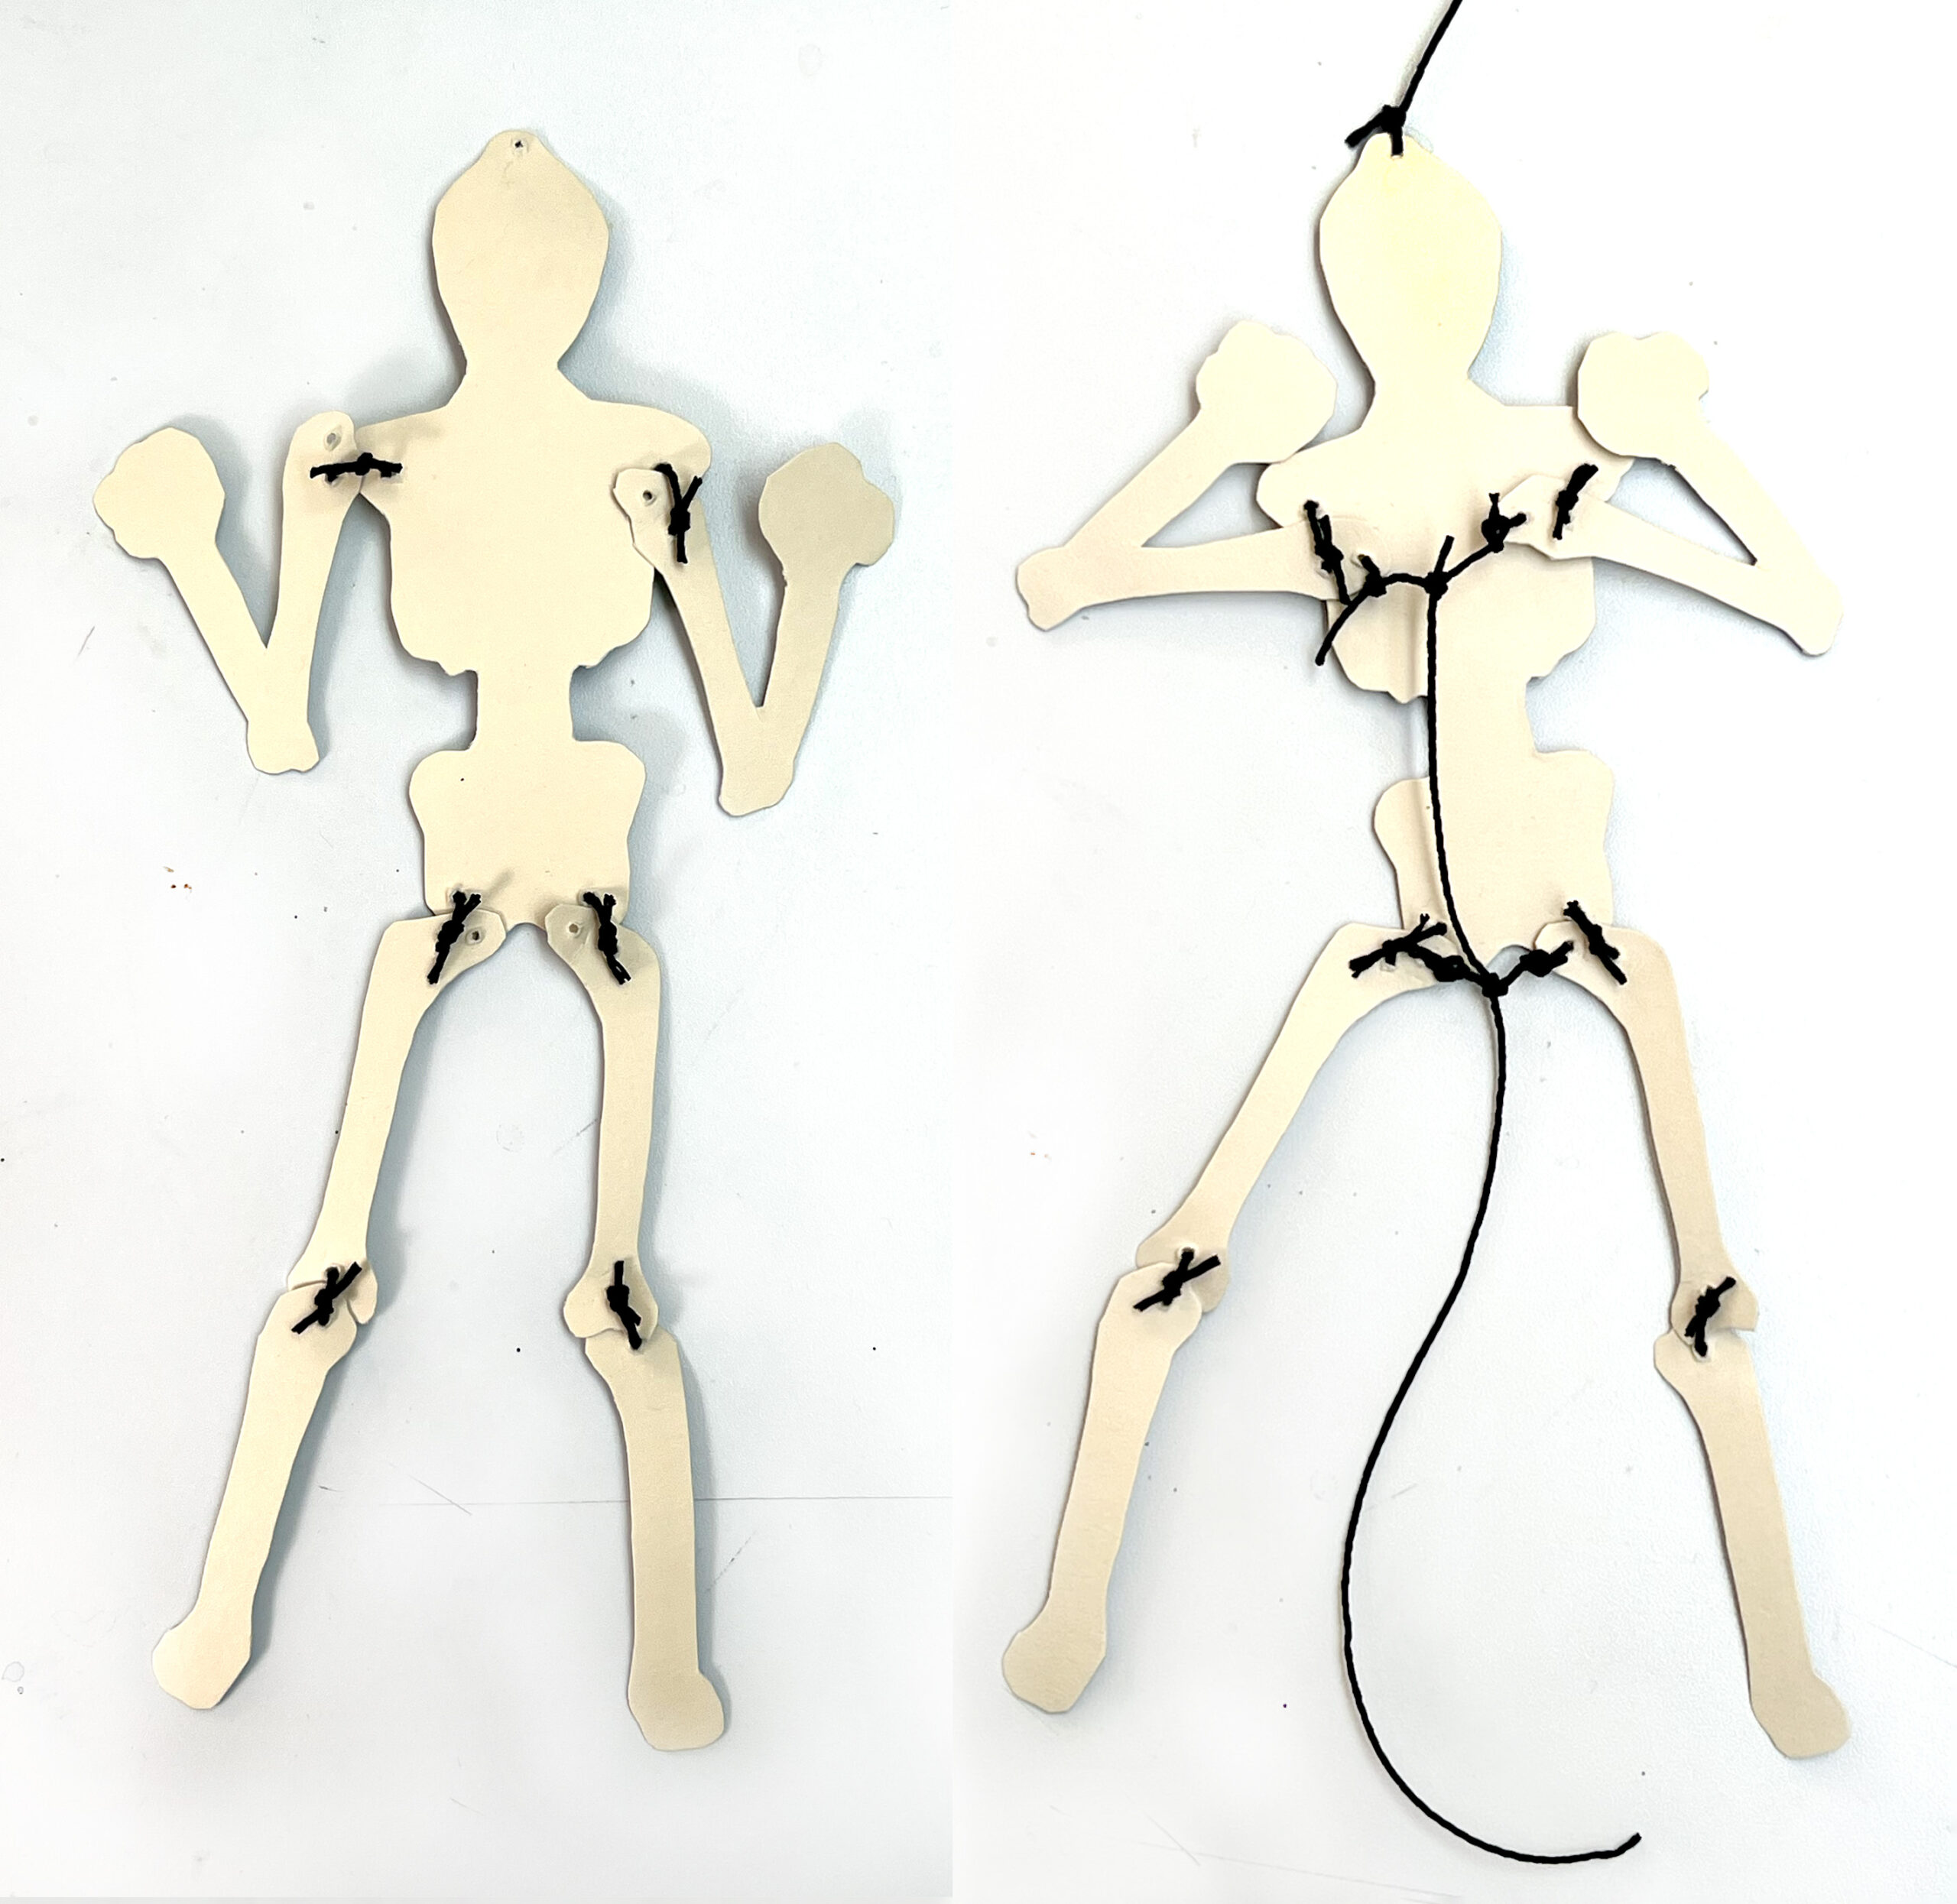 image of how to make a paper skeleton puppet showing the back of the puppet and where to sew small pieces of thread at the skeleton joints